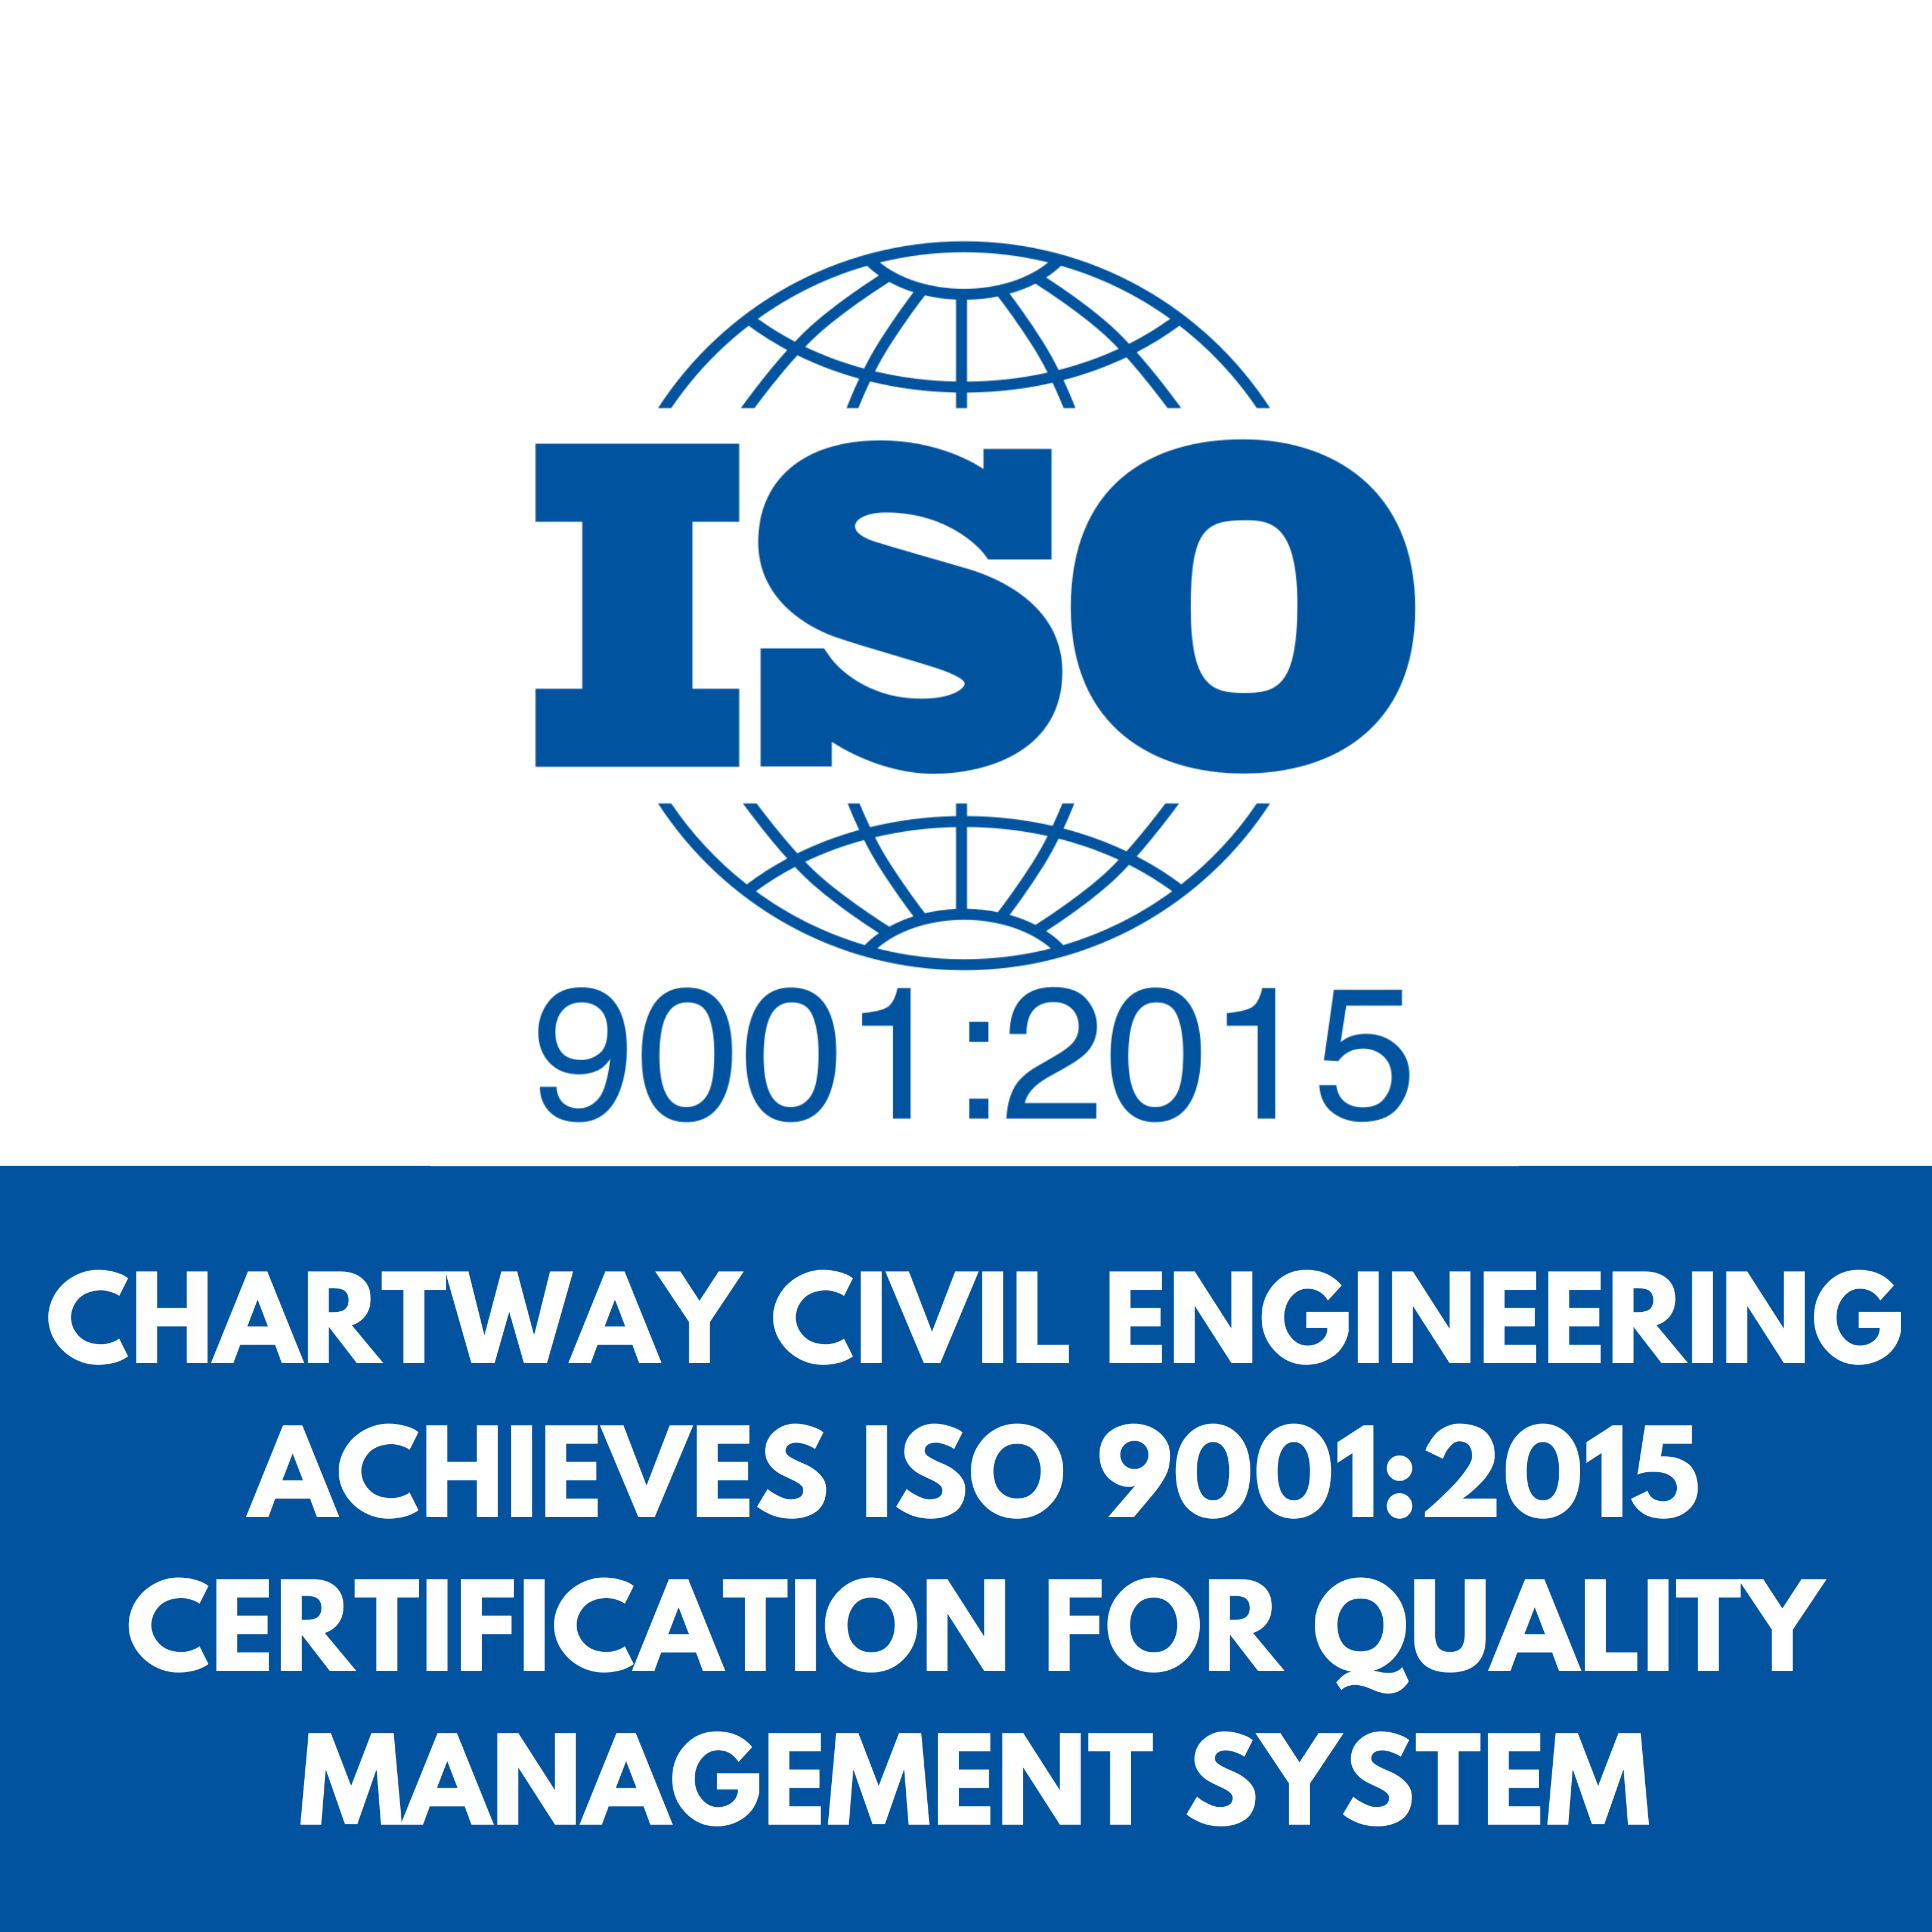 CCE Achieves ISO 9001:2015 Certification for Quality Management System